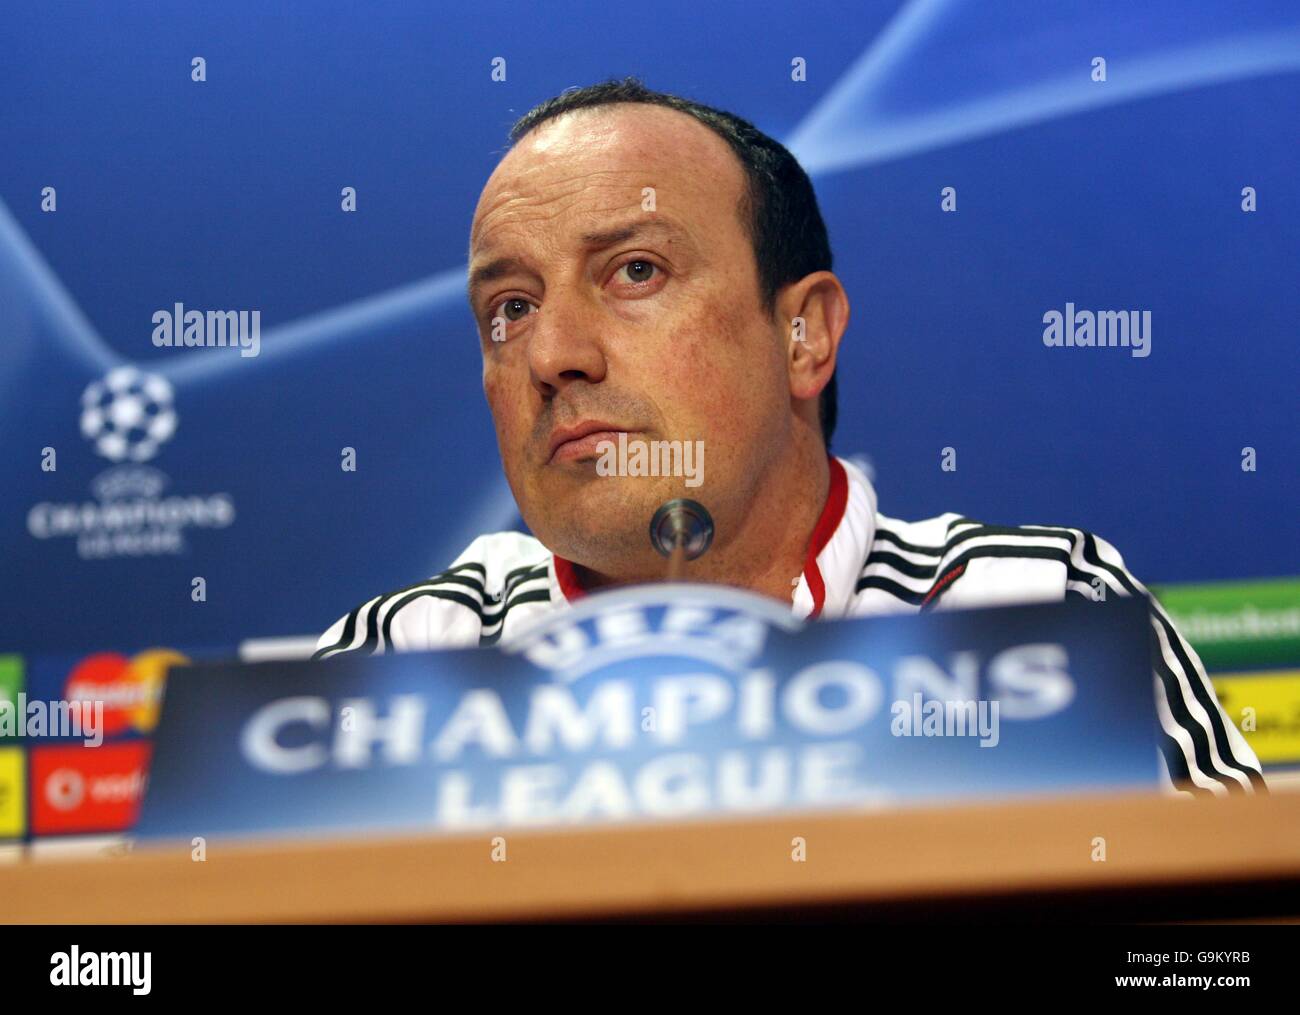 Soccer - UEFA Champions League - Group C - Galatasaray v Liverpool - Liverpool Press Conference - Ataturk Olympic Stadium. Liverpool's manager Rafael Benitez talks to the press Stock Photo